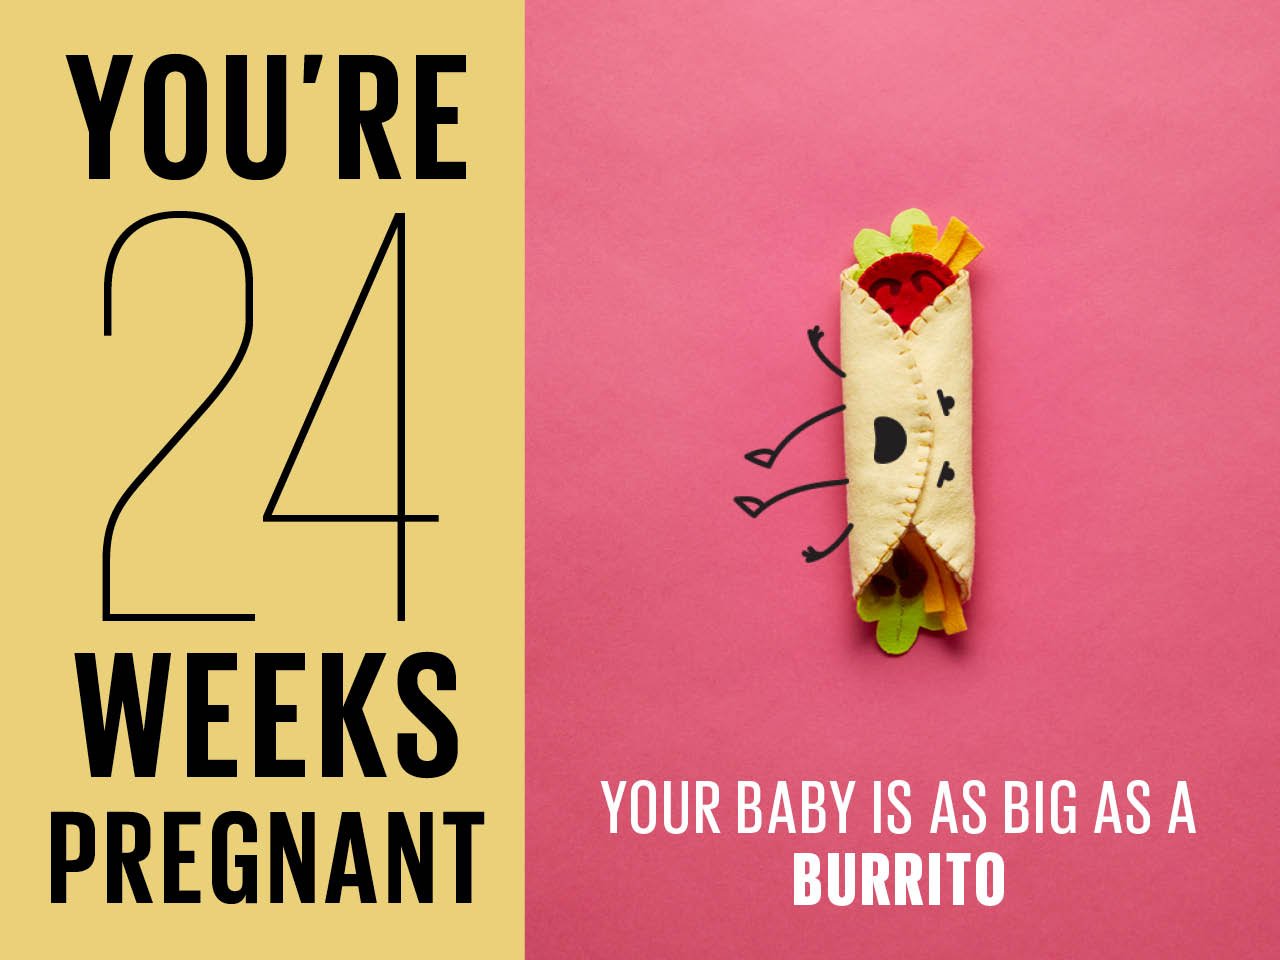 Felt burrito used to show how big baby is at 24 weeks pregnant